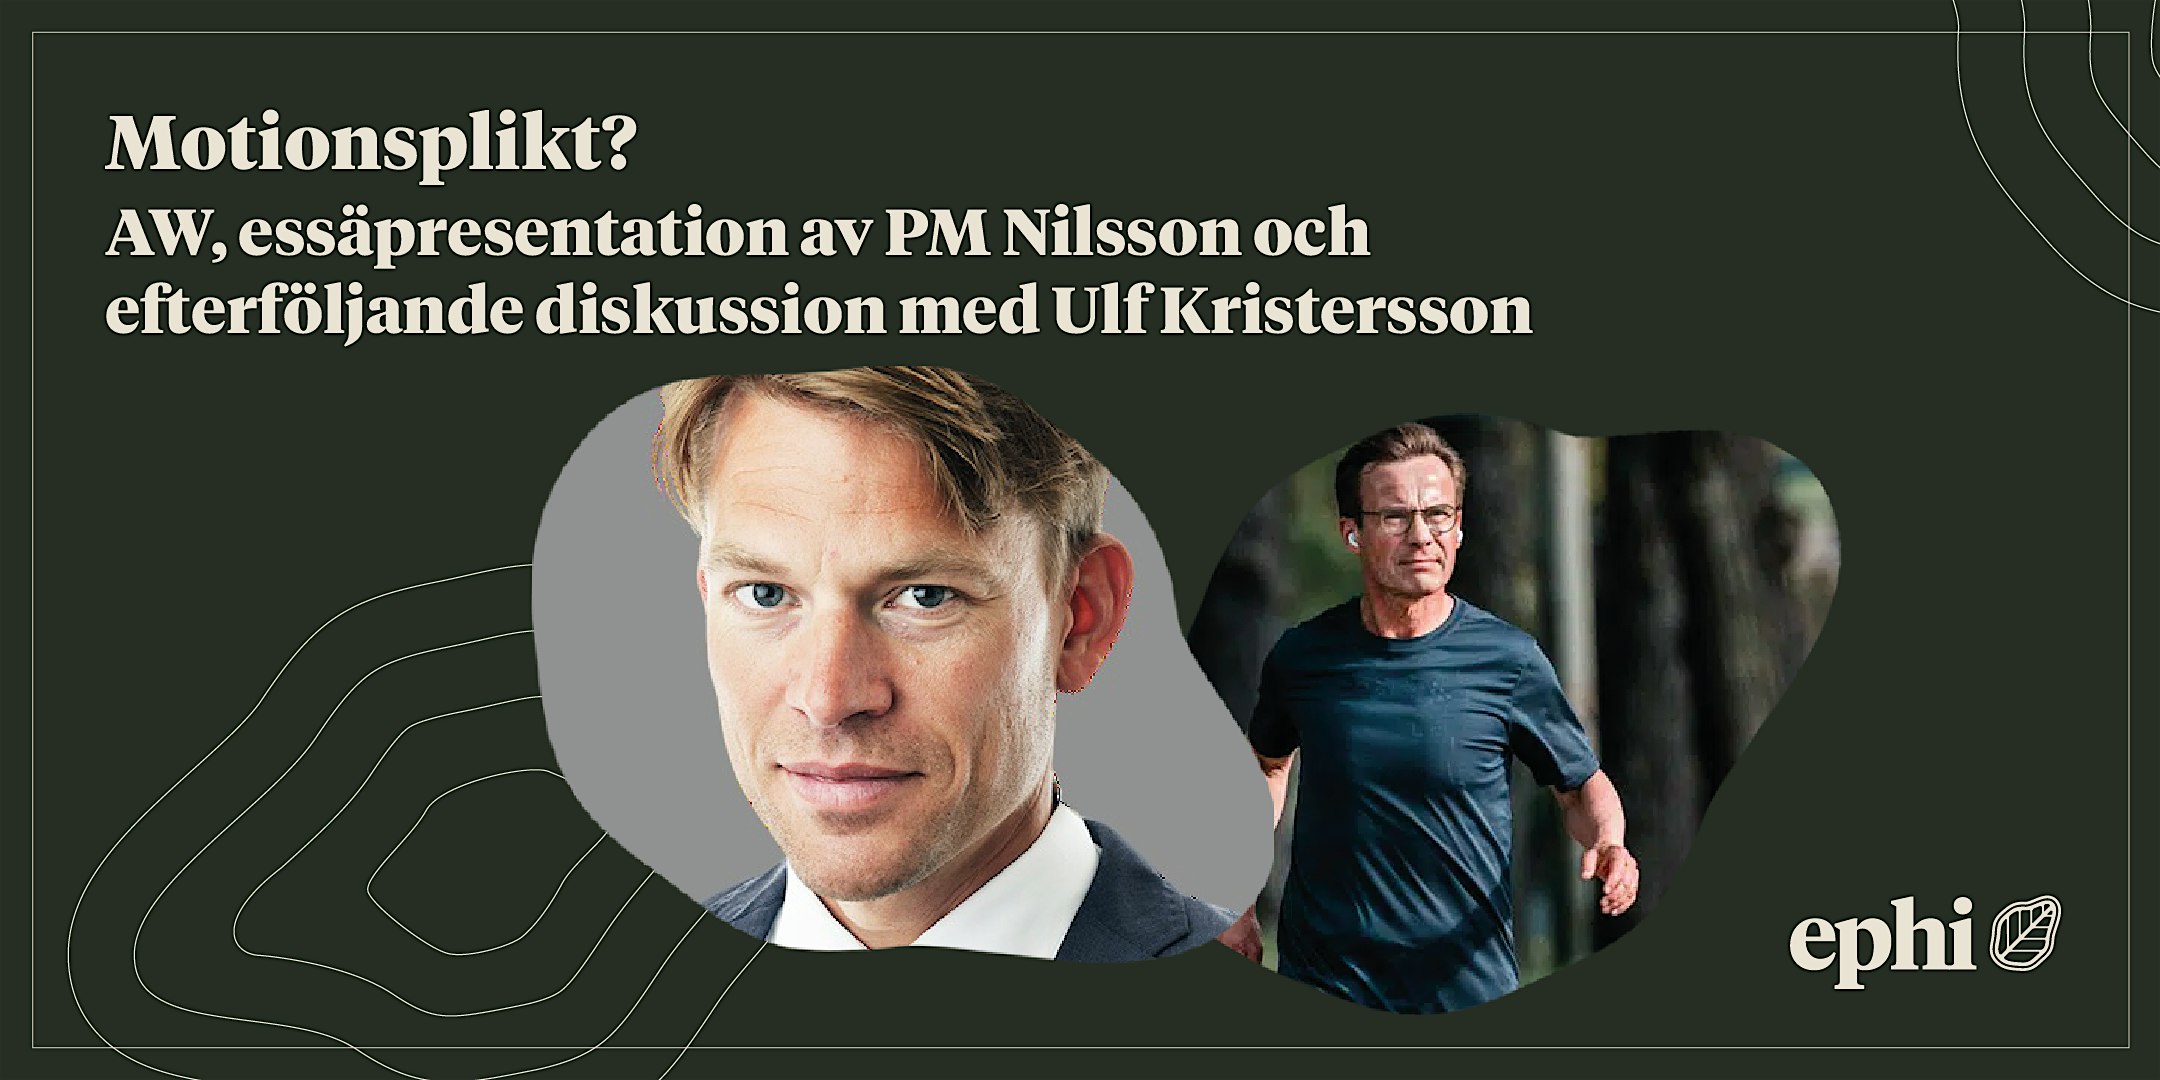 Motionsplikt? Speech by PM Nilsson and discussion with Ulf Kristersson.